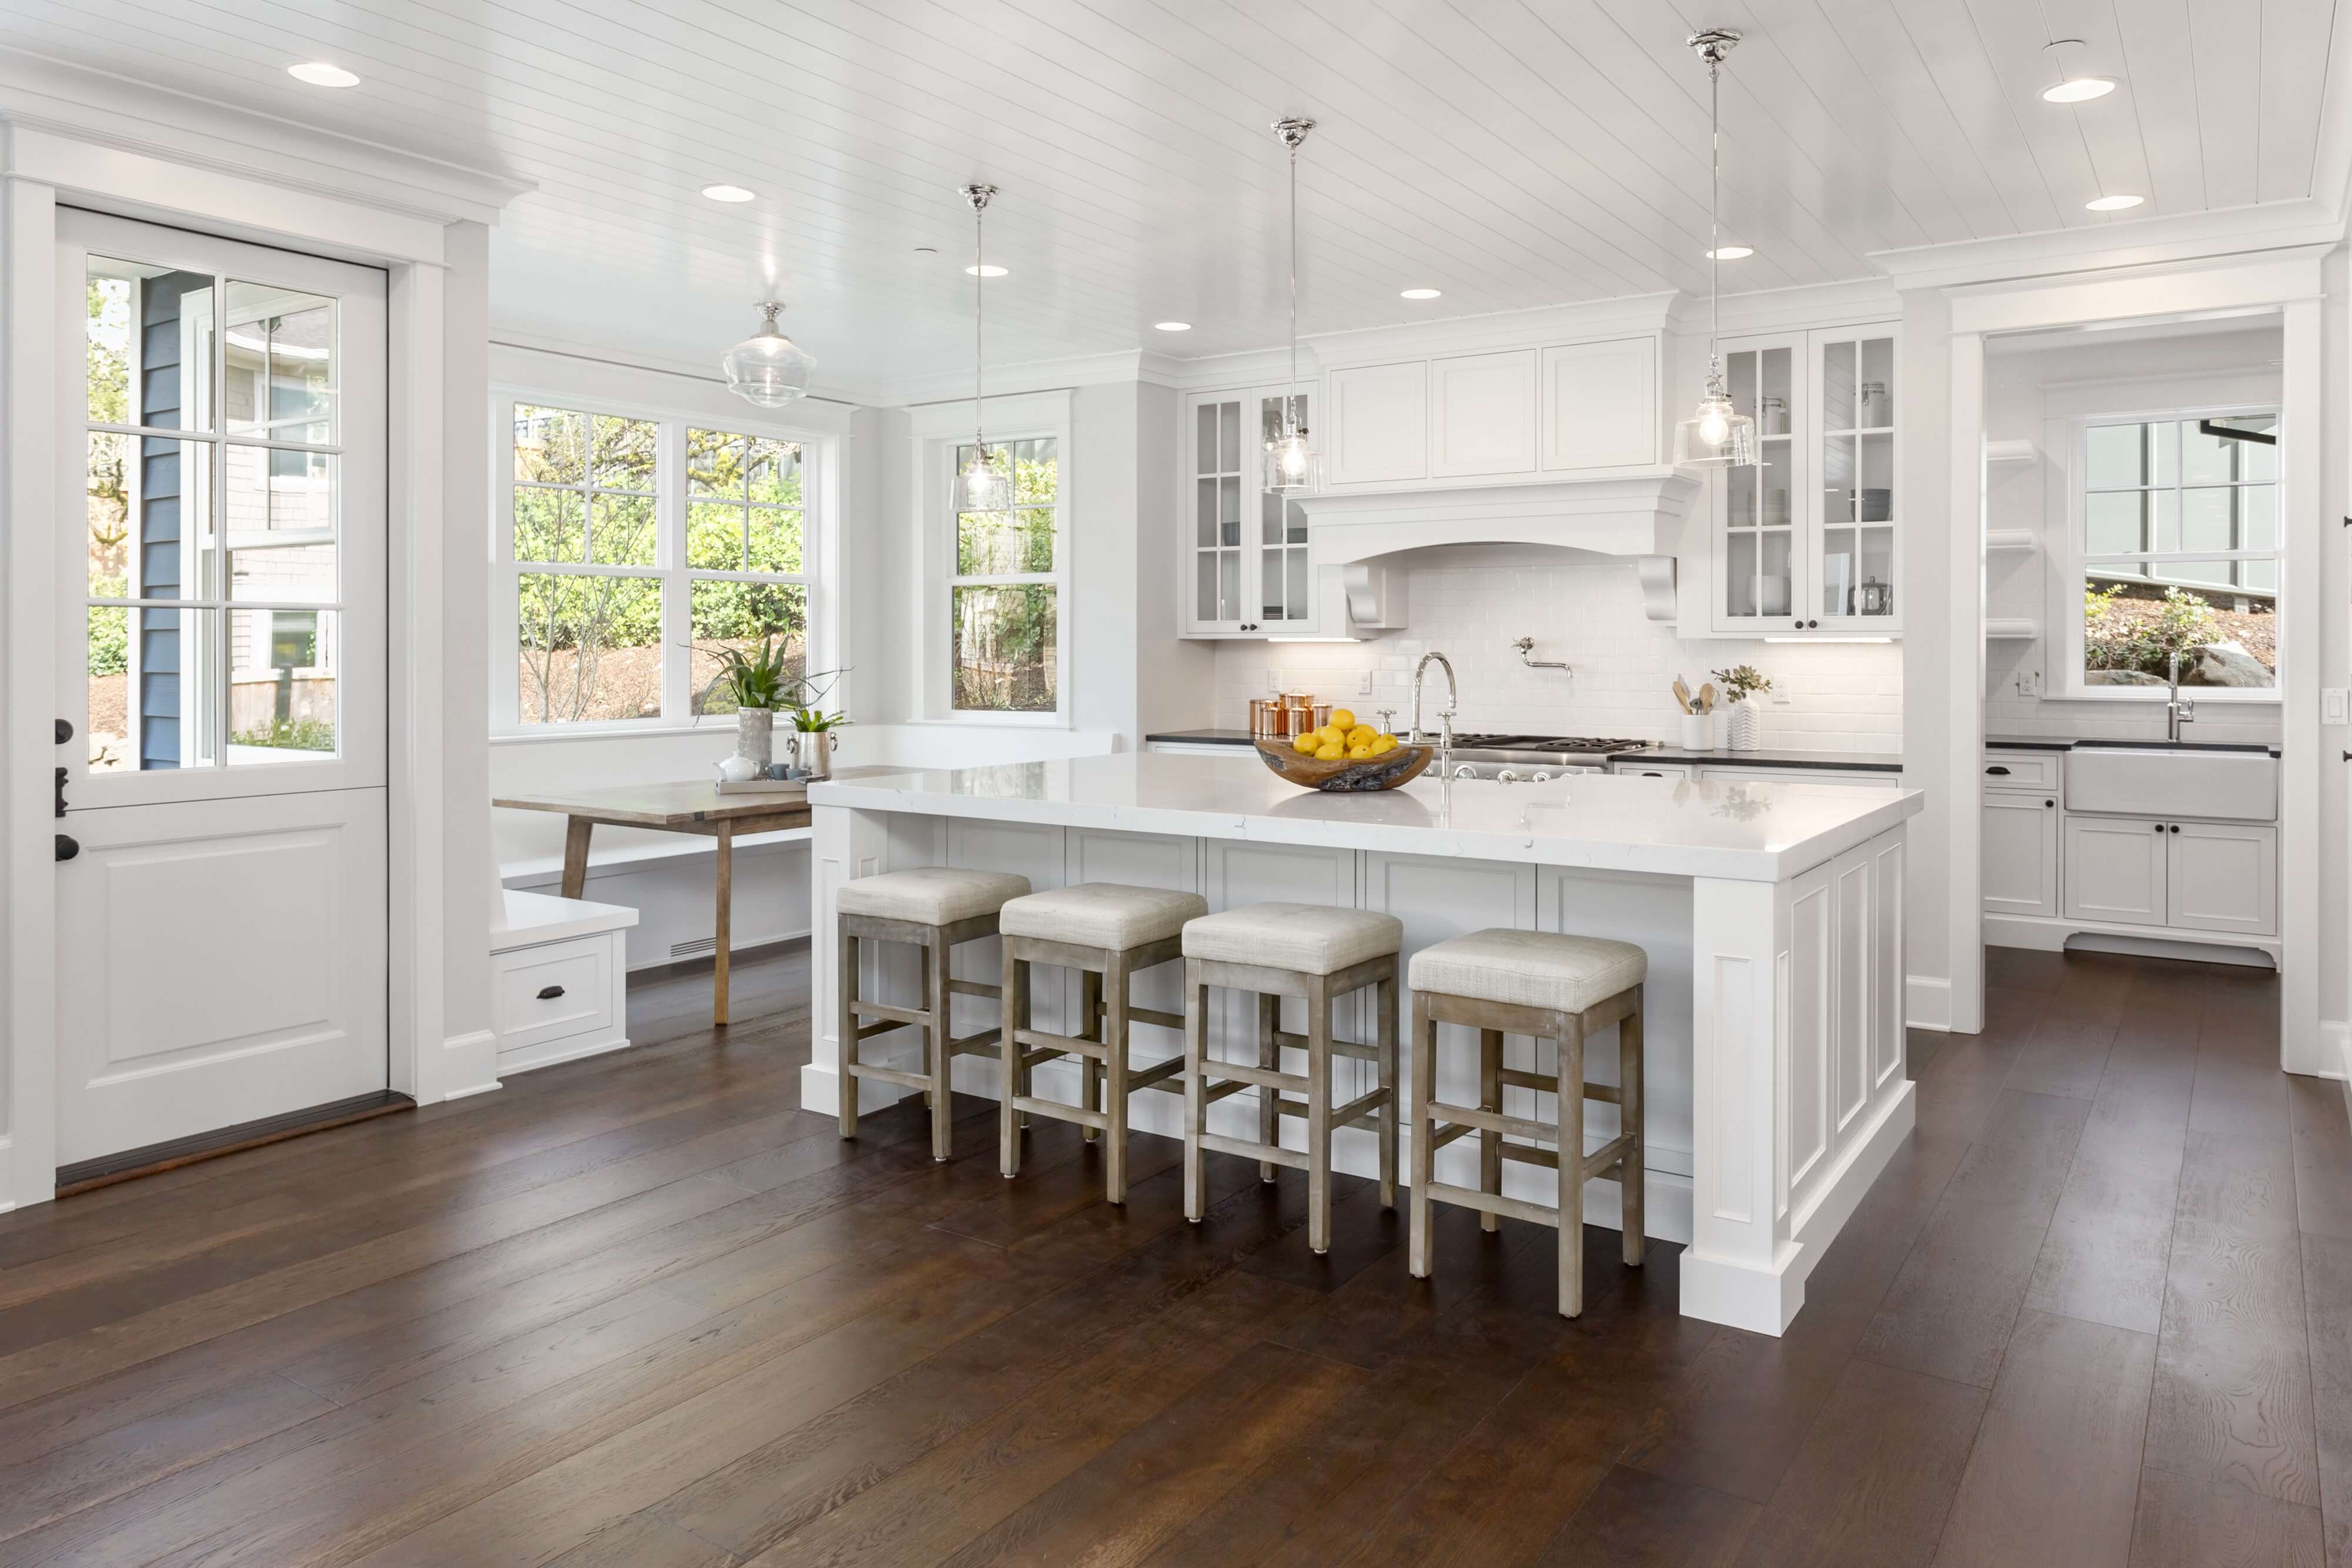 kitchen remodels are done faster with quick ship kitchens